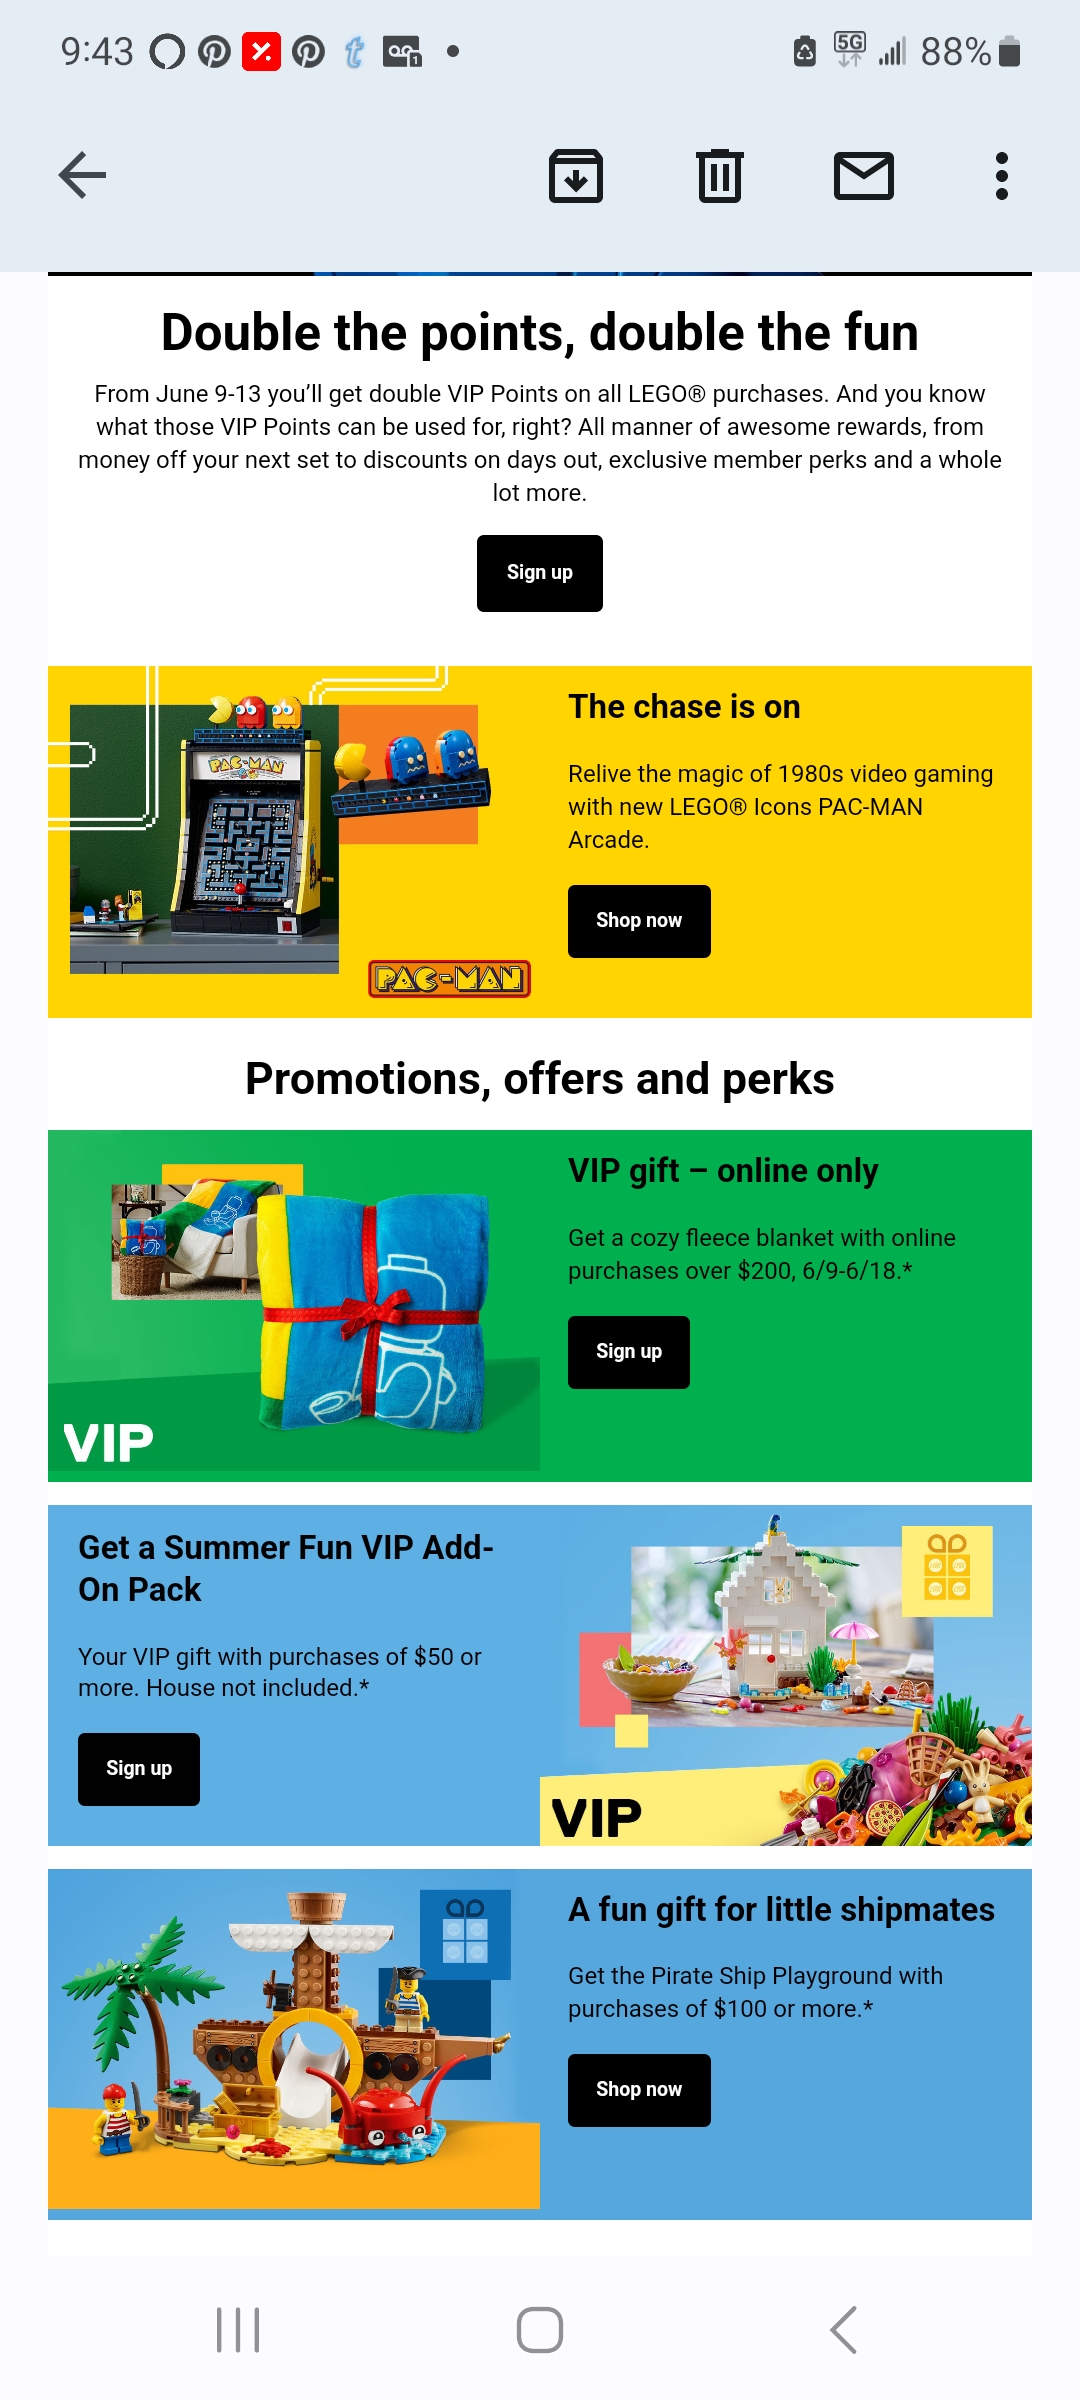 lego vip double point, gift with $100 purchase